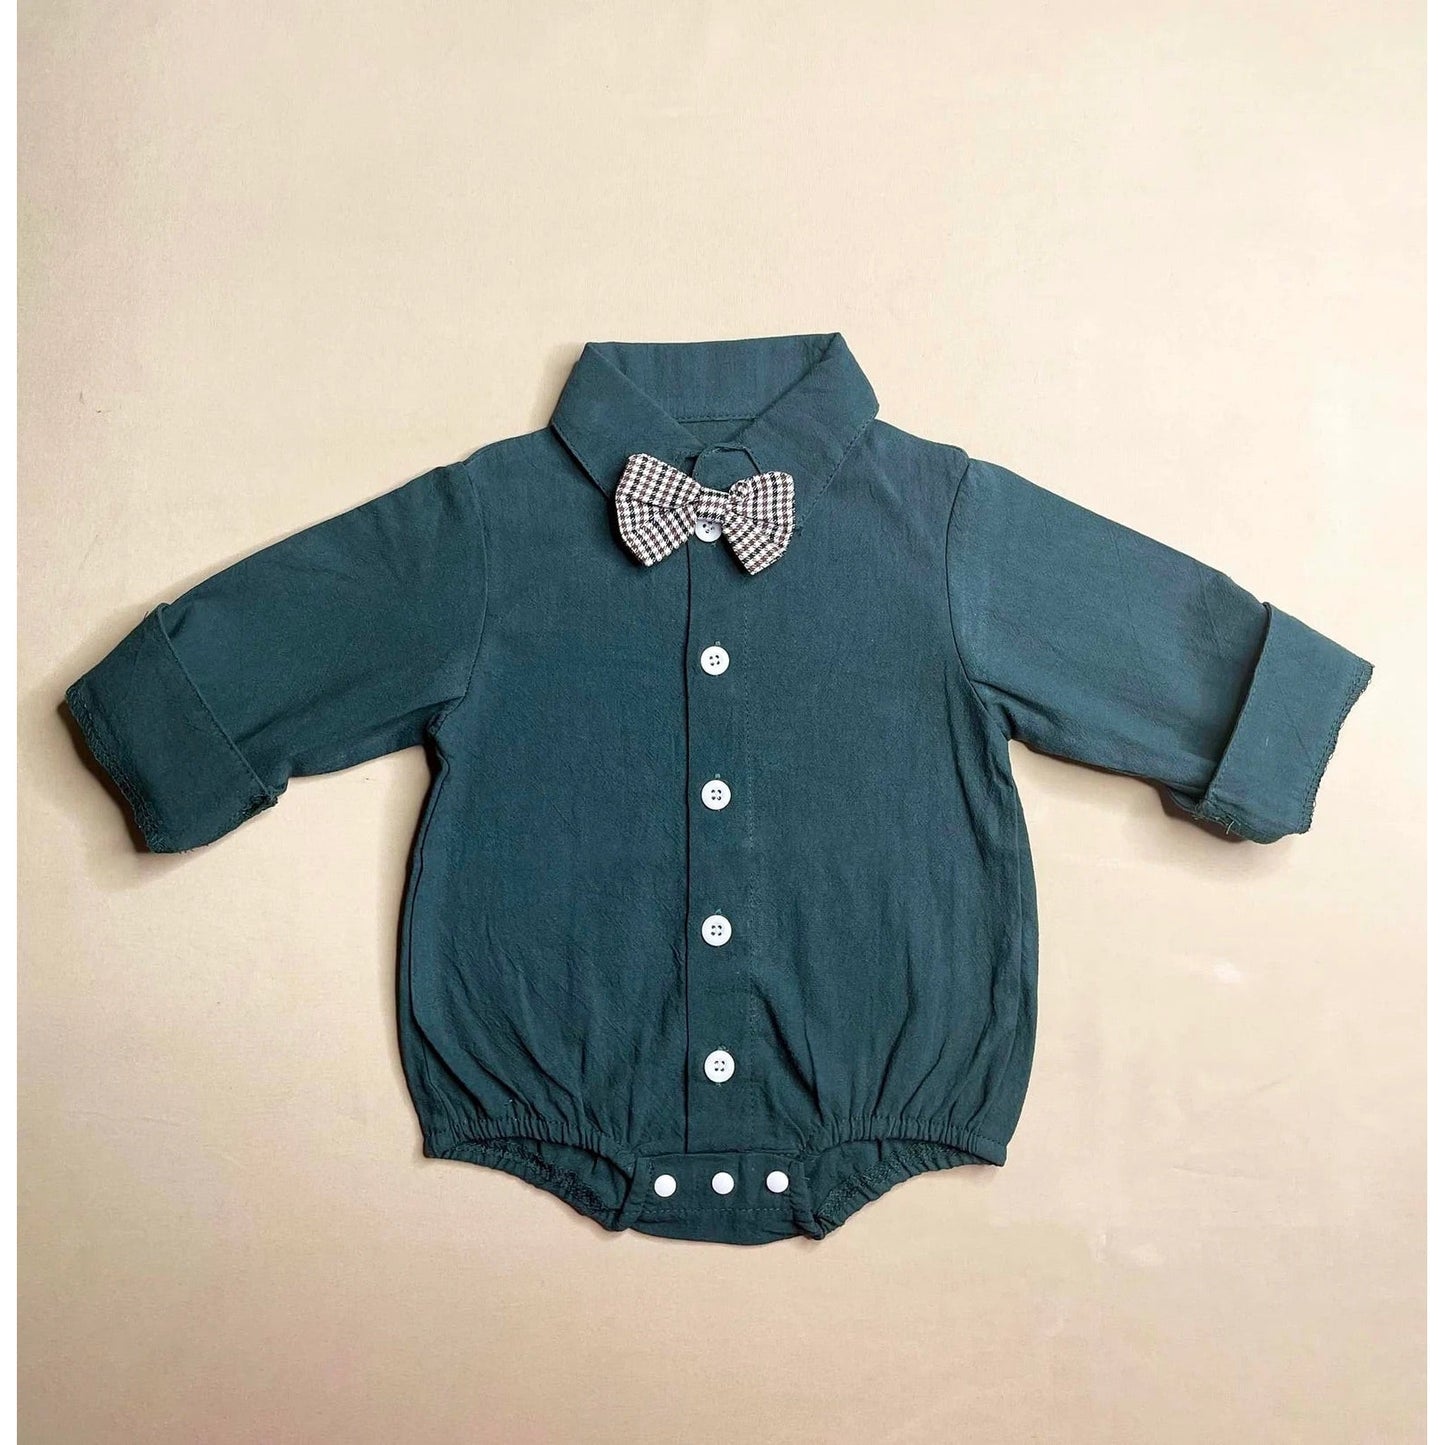 Collared Onesie with Bow Tie